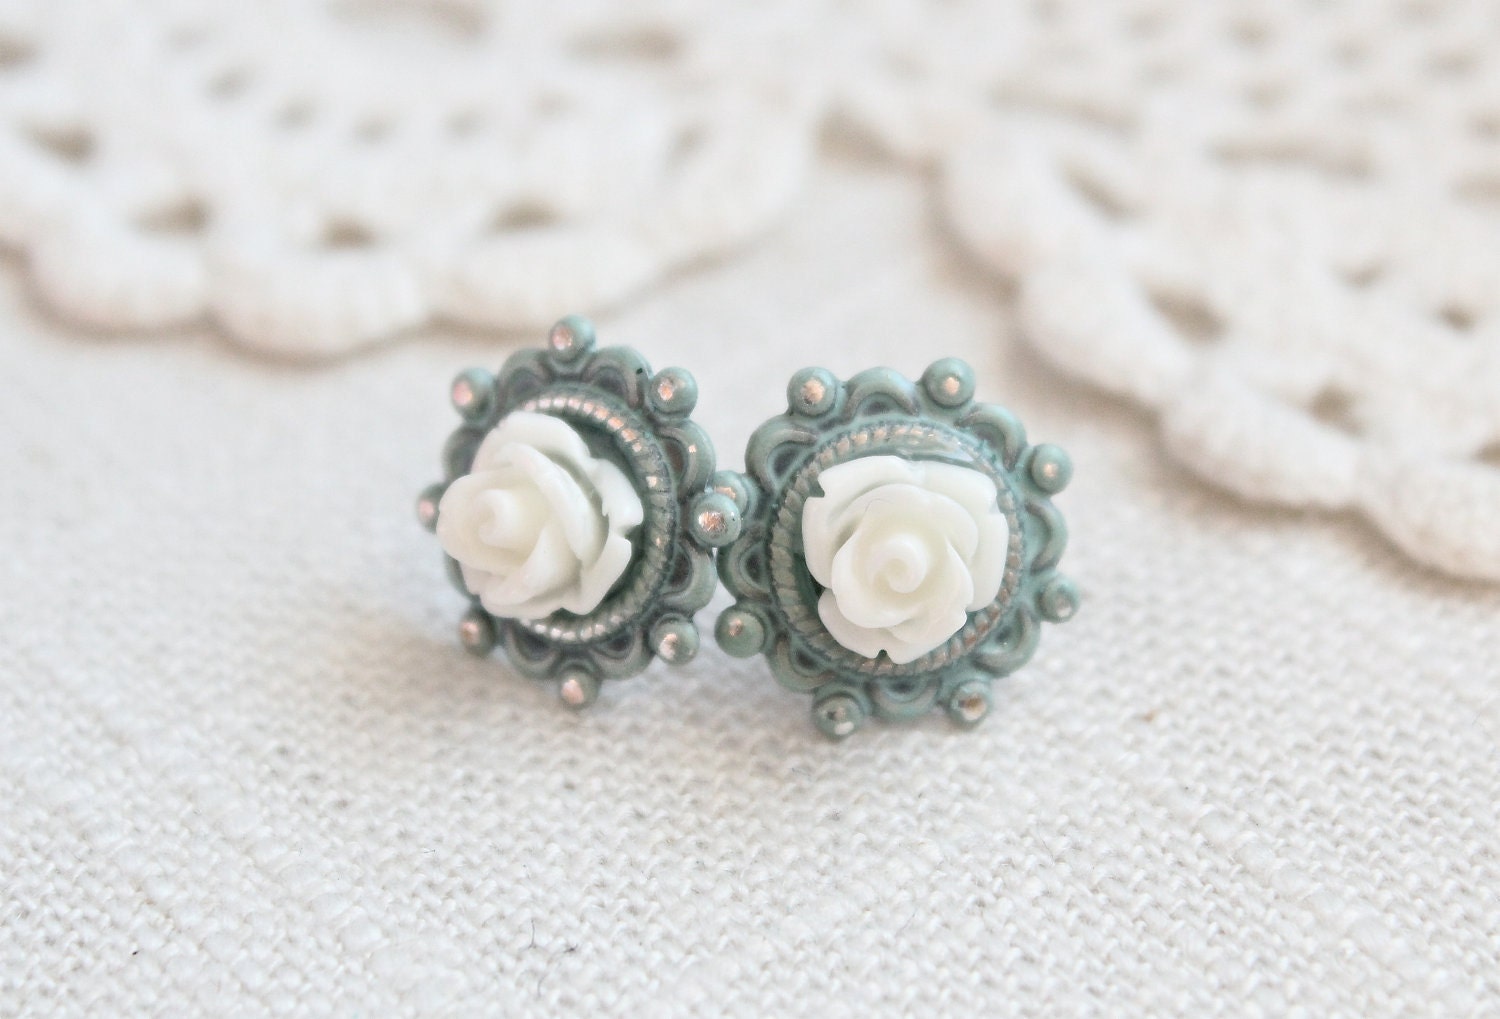 Shabby chic blue and cream rose earrings.  Post style.